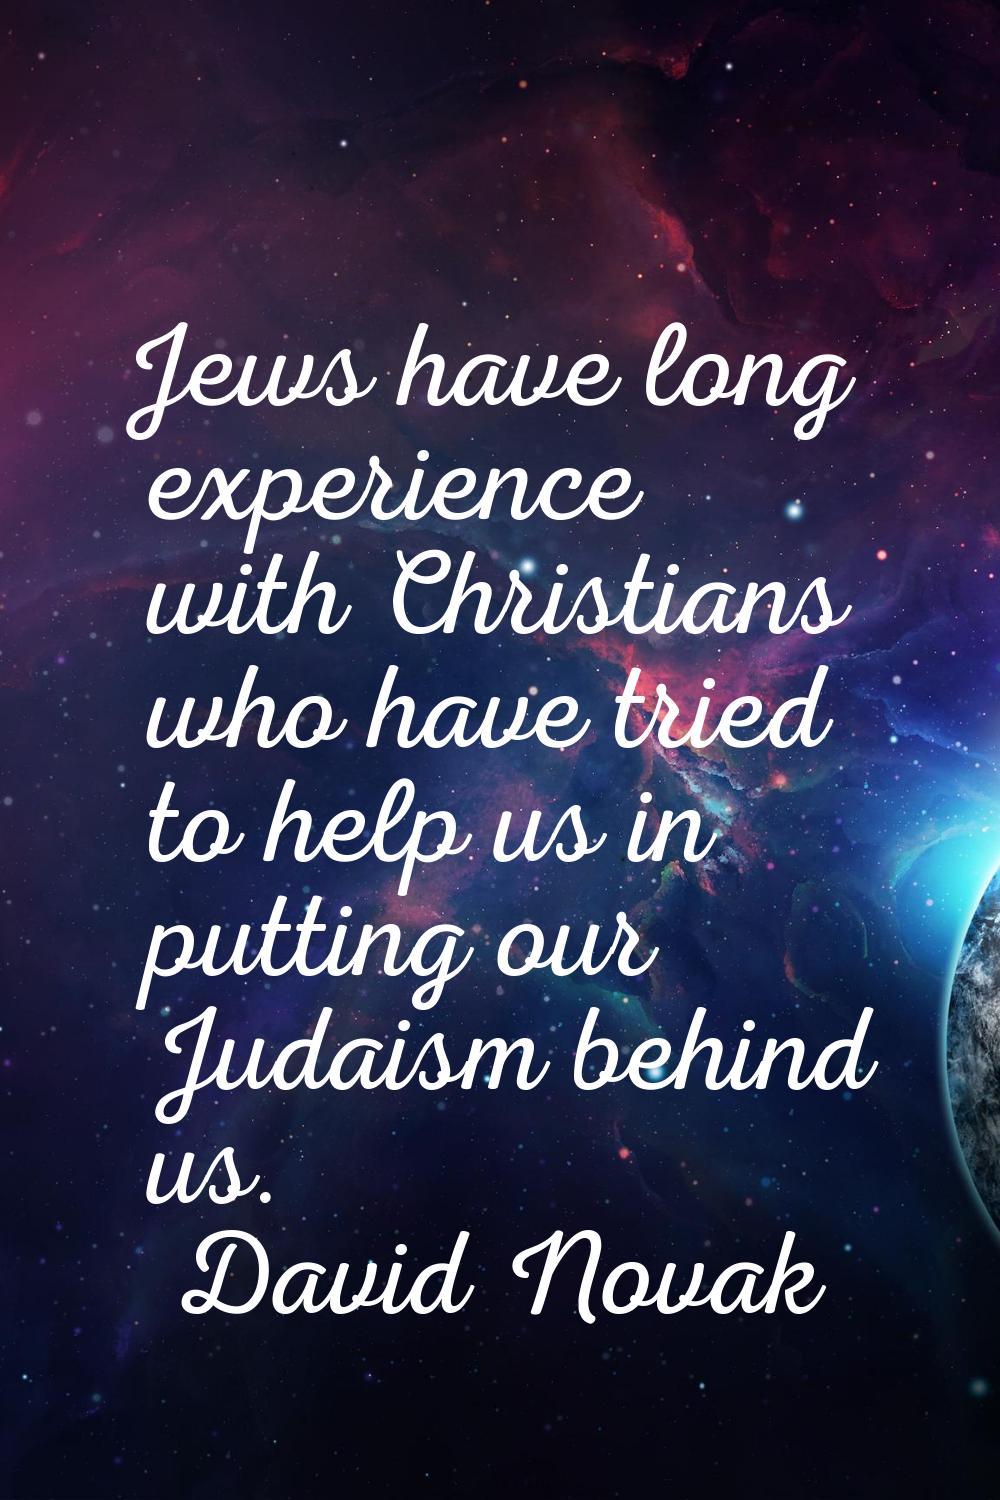 Jews have long experience with Christians who have tried to help us in putting our Judaism behind u